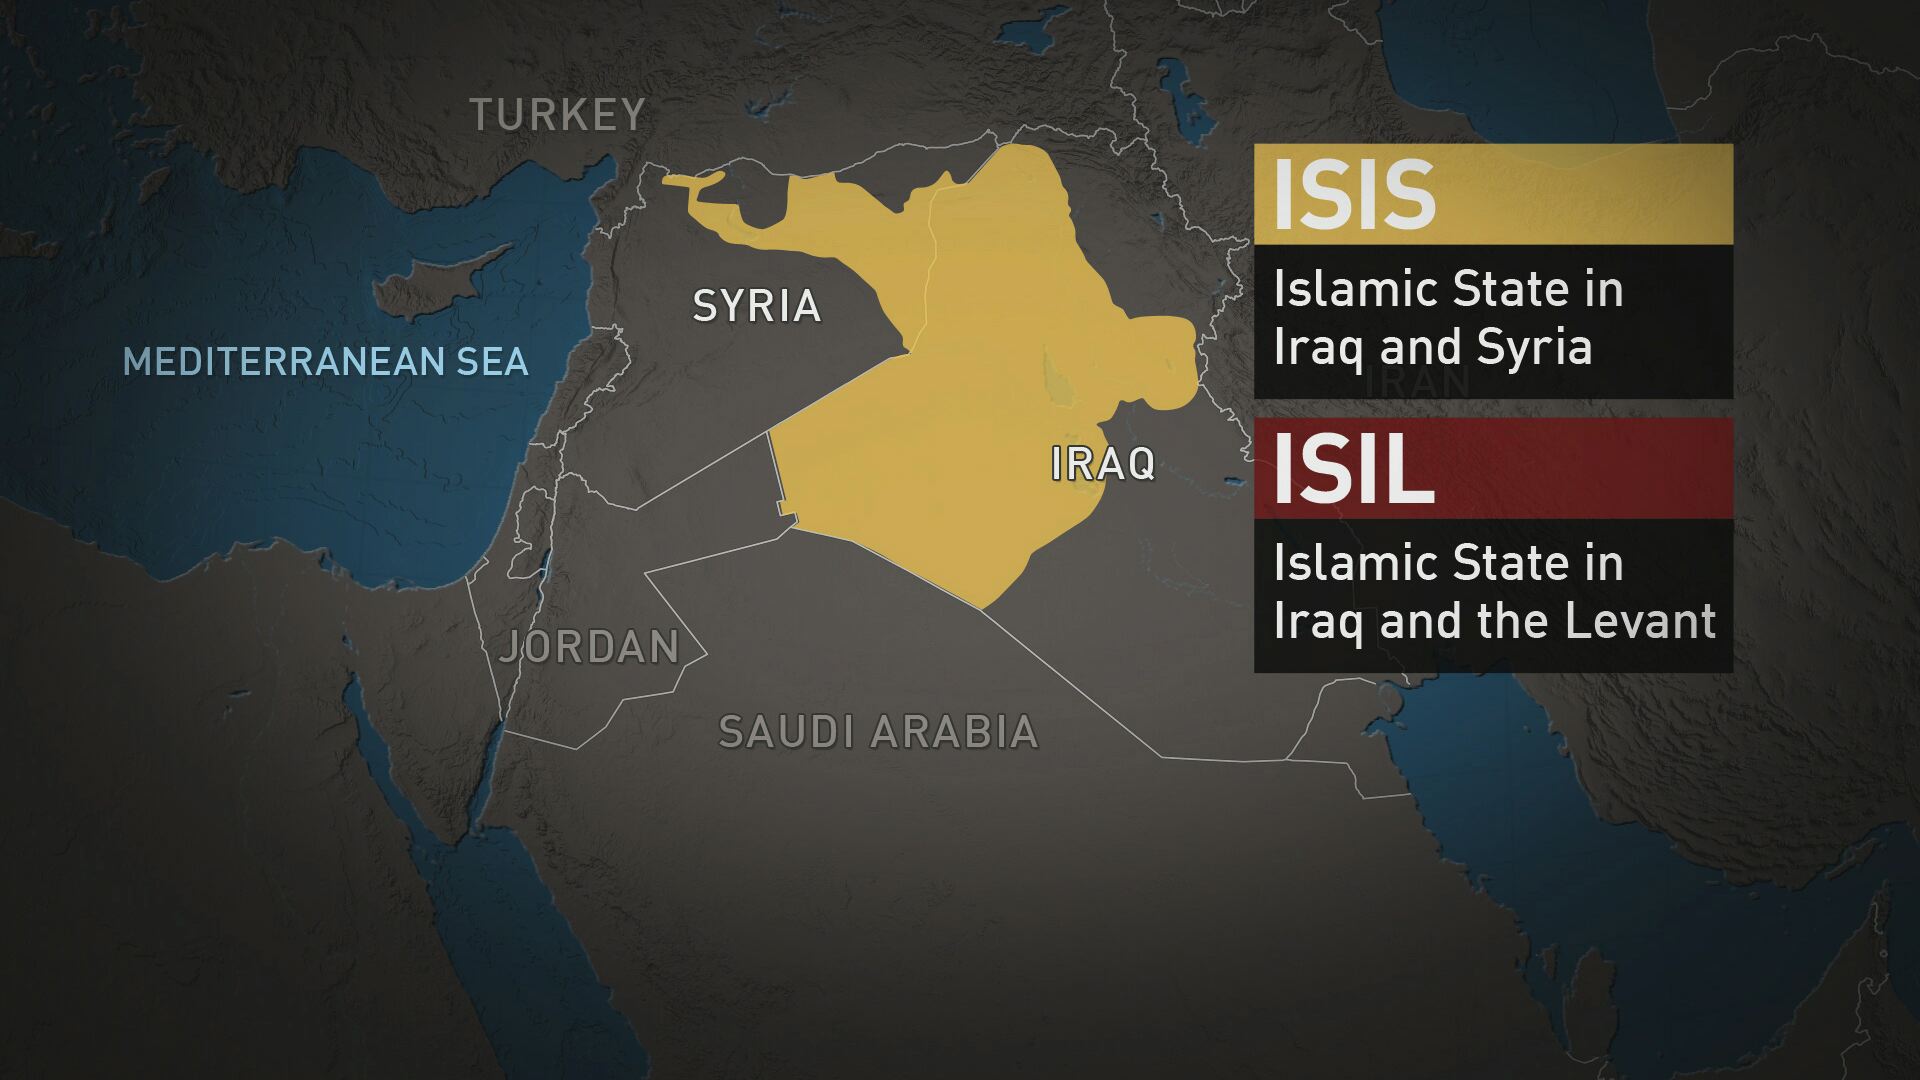 Is It ISIS or ISIL?